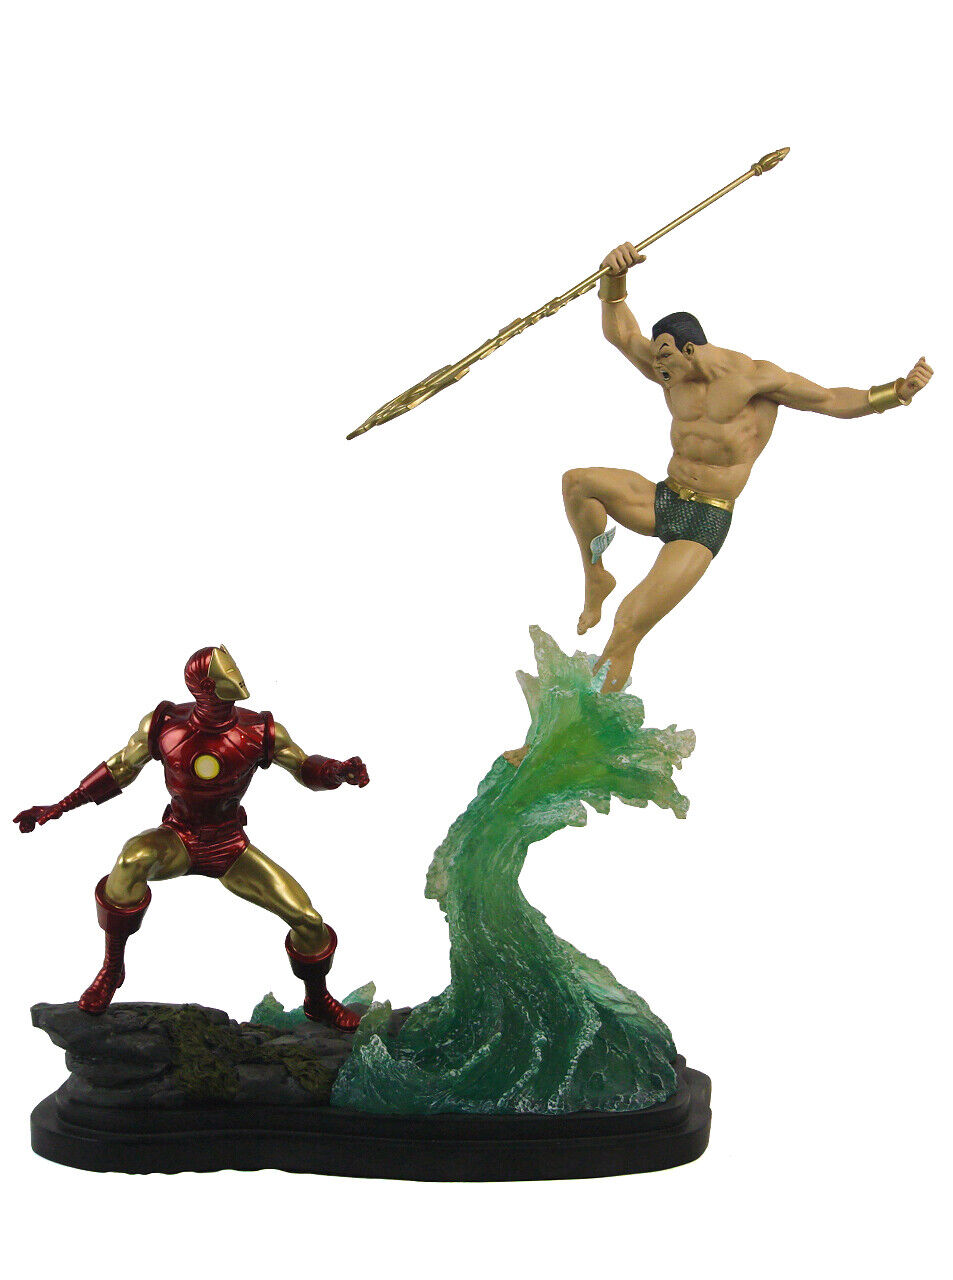 Sideshow Collectibles Namor Vs Iron Man Exclusive Diorama Statue Marvel Sample